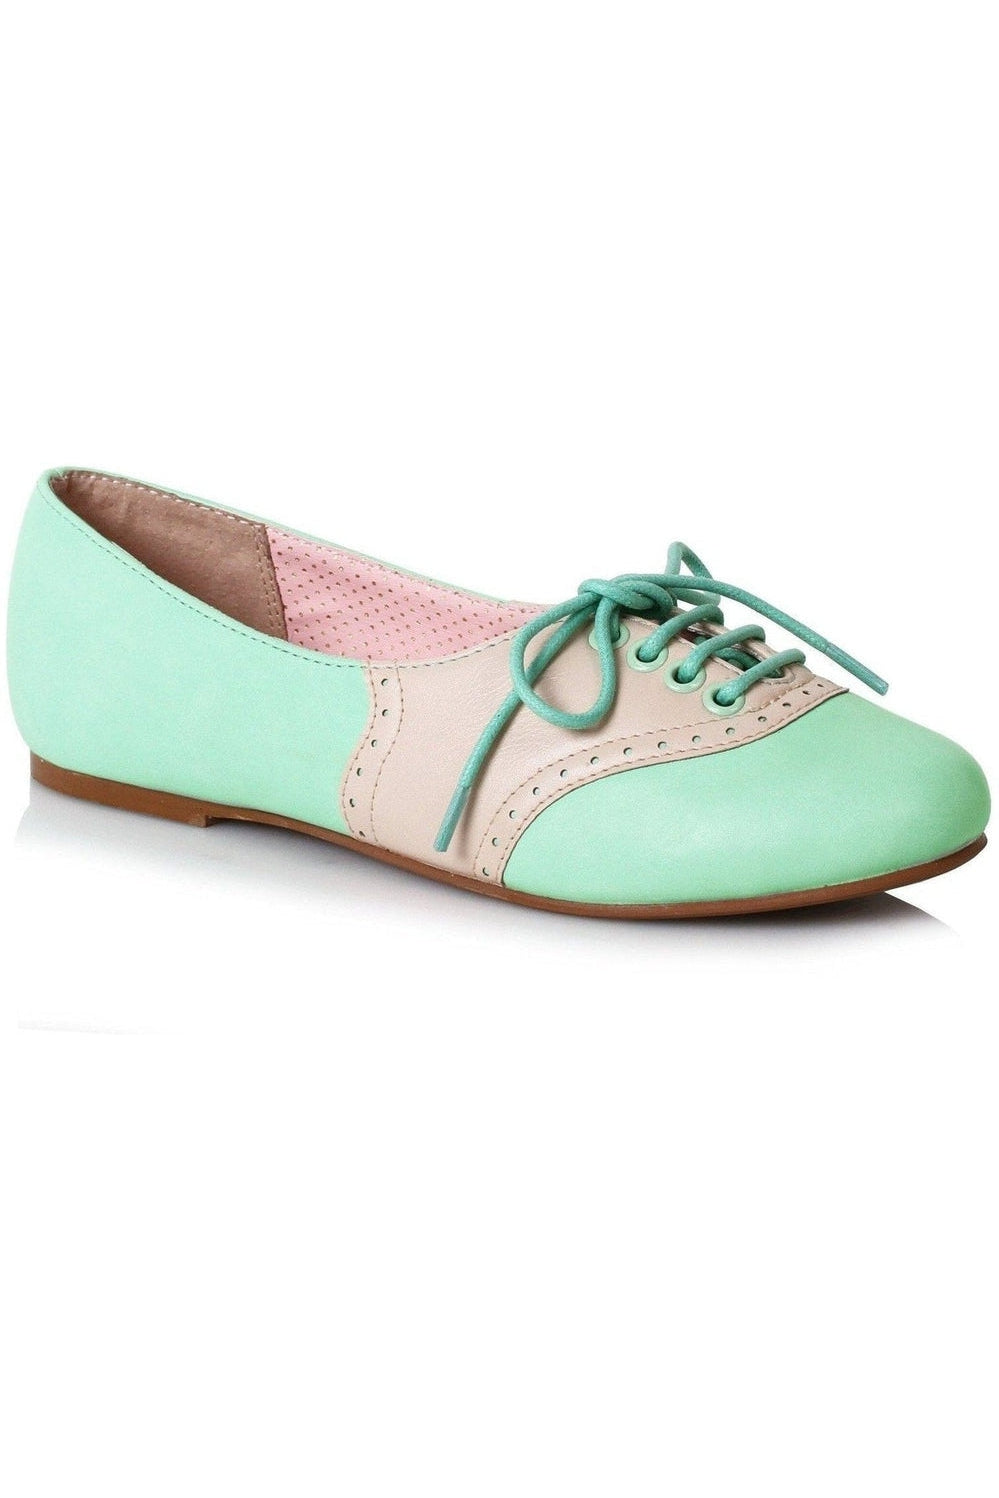 Bettie Paige Halle Oxford Flat | Green Faux Leather-Bettie Page by Ellie-SEXYSHOES.COM